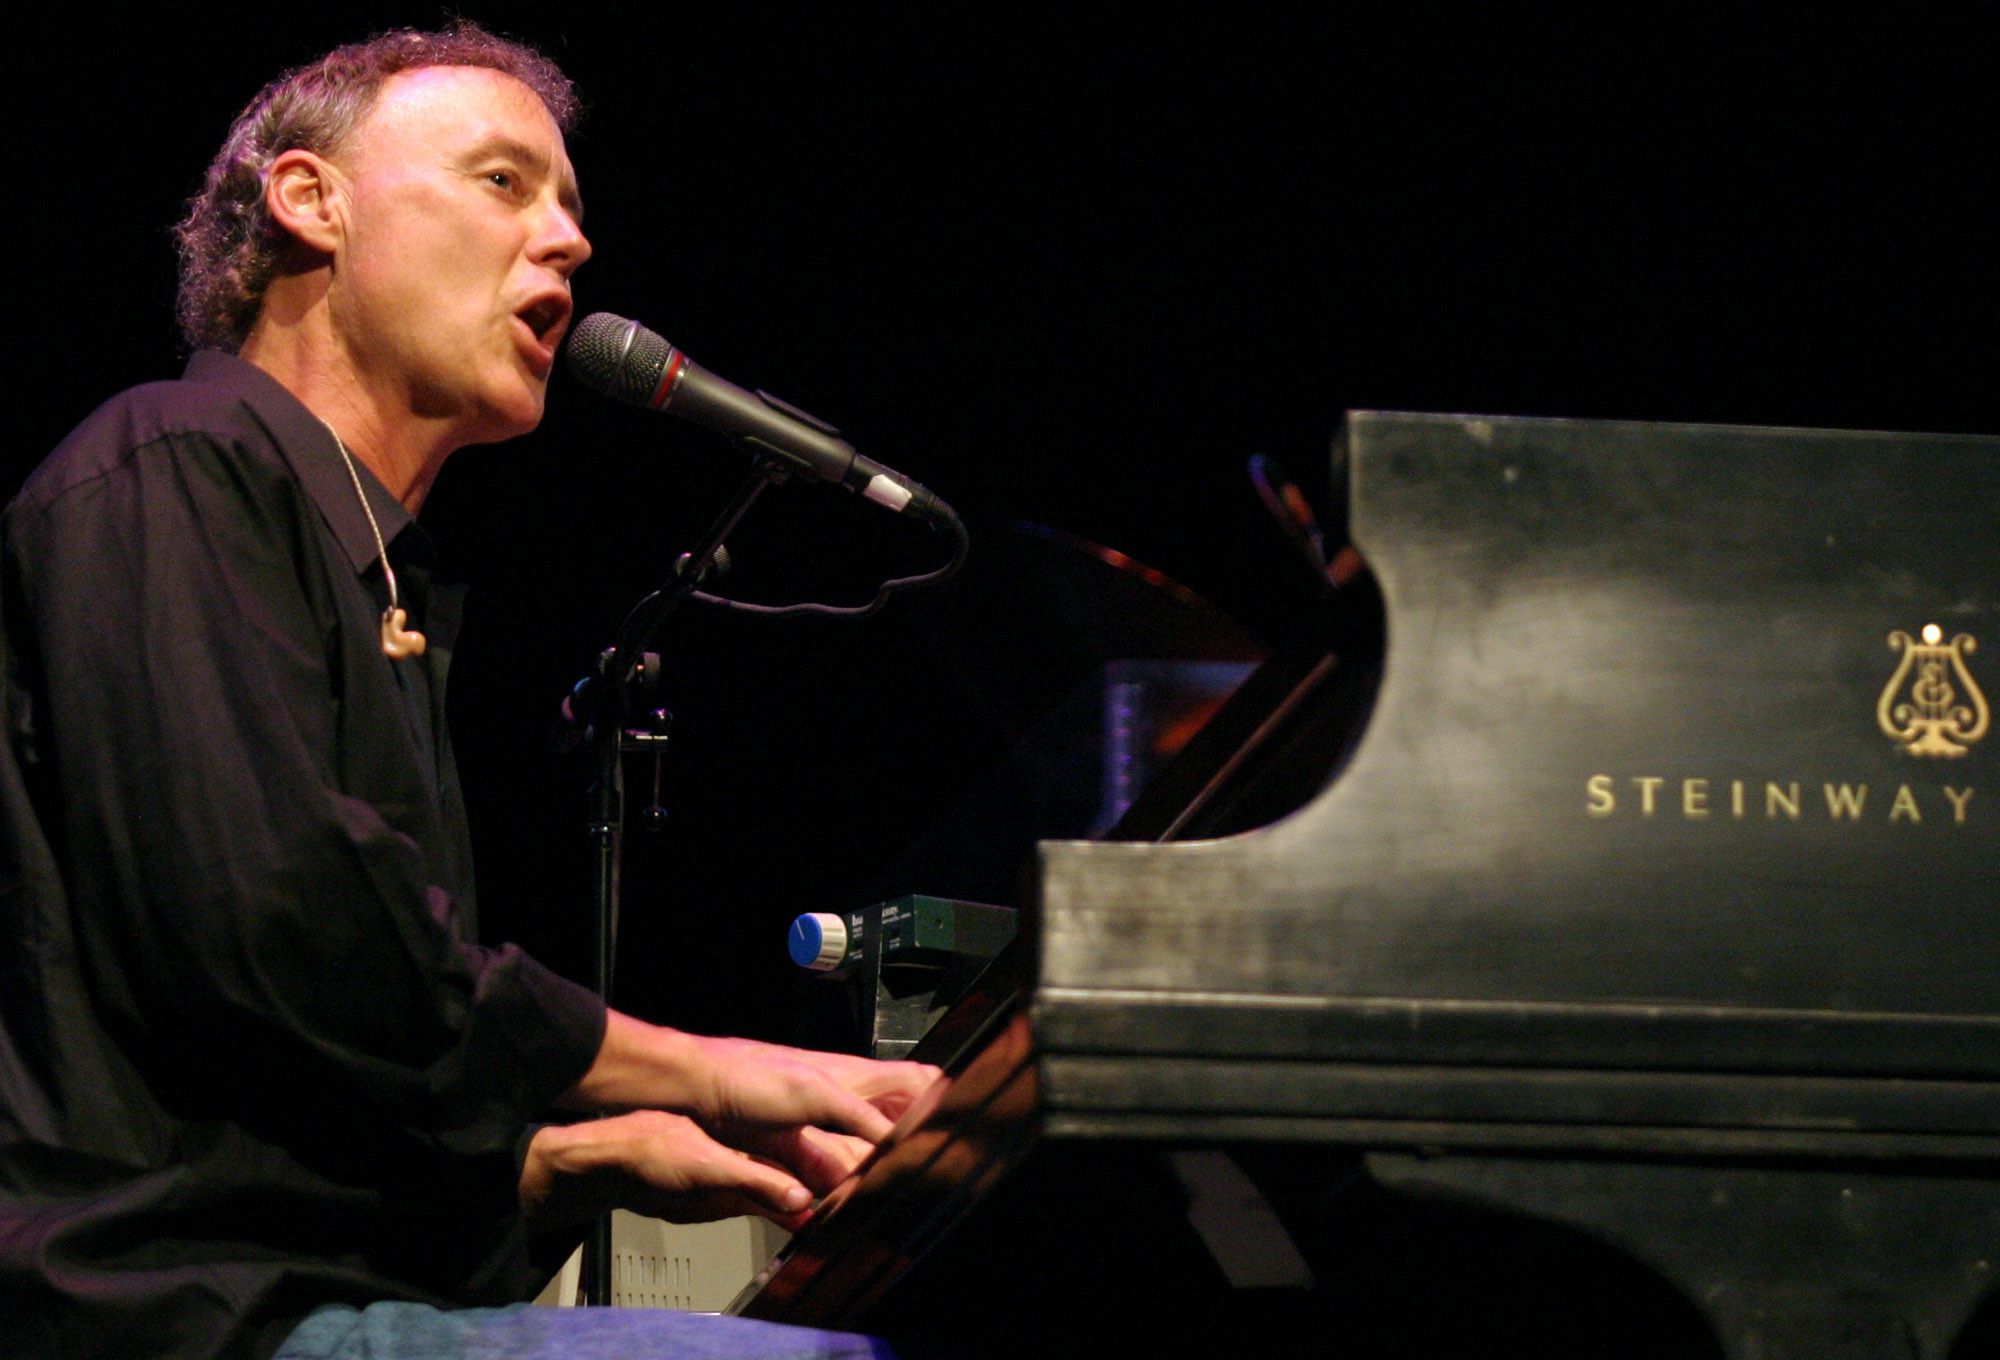 Bruce Hornsby Wallpapers